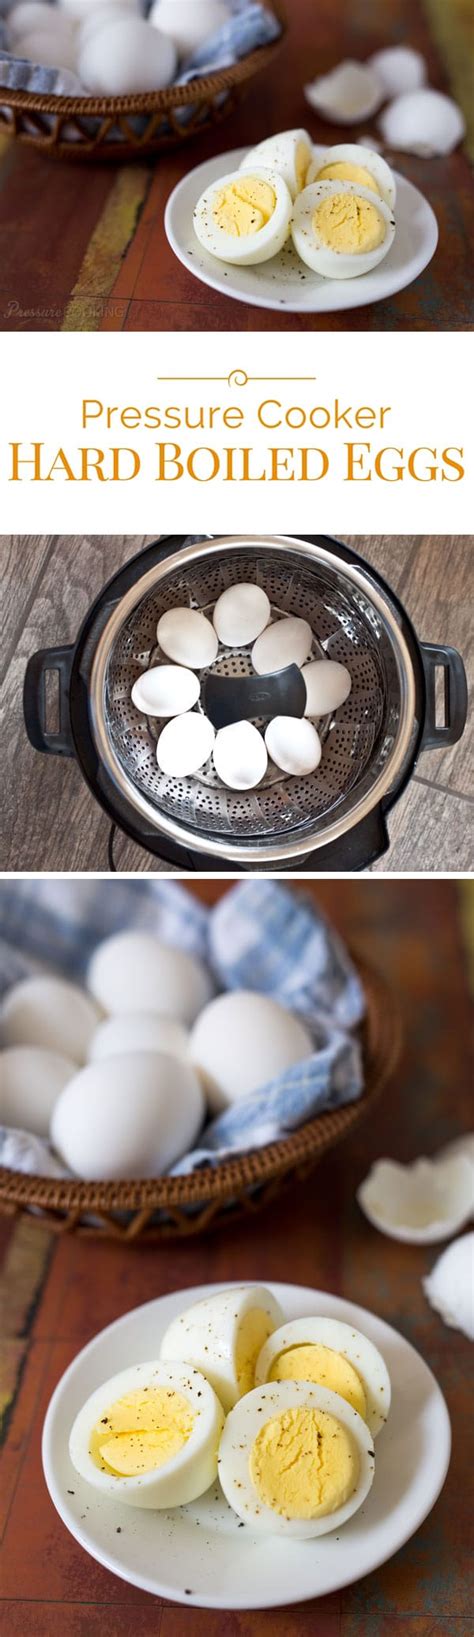 This recipe includes a different technique for microwave poaching that starts with boiling water. Pressure Cooker Hard Boiled Eggs | Pressure Cooking Today